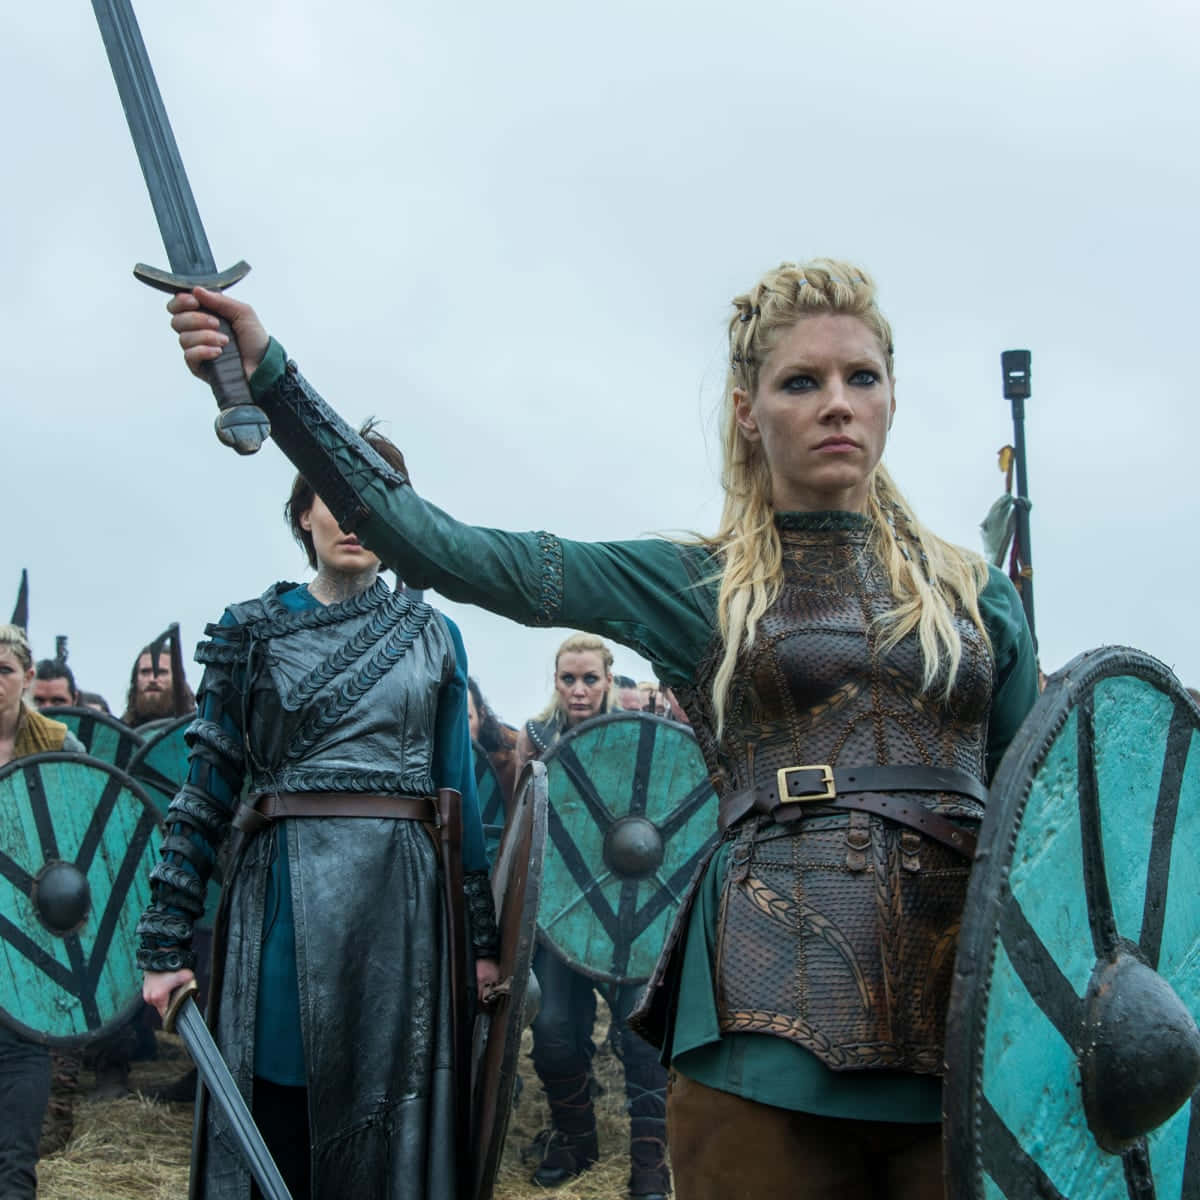 "Fearless Female Viking Warriors Lead the Way to Victory"